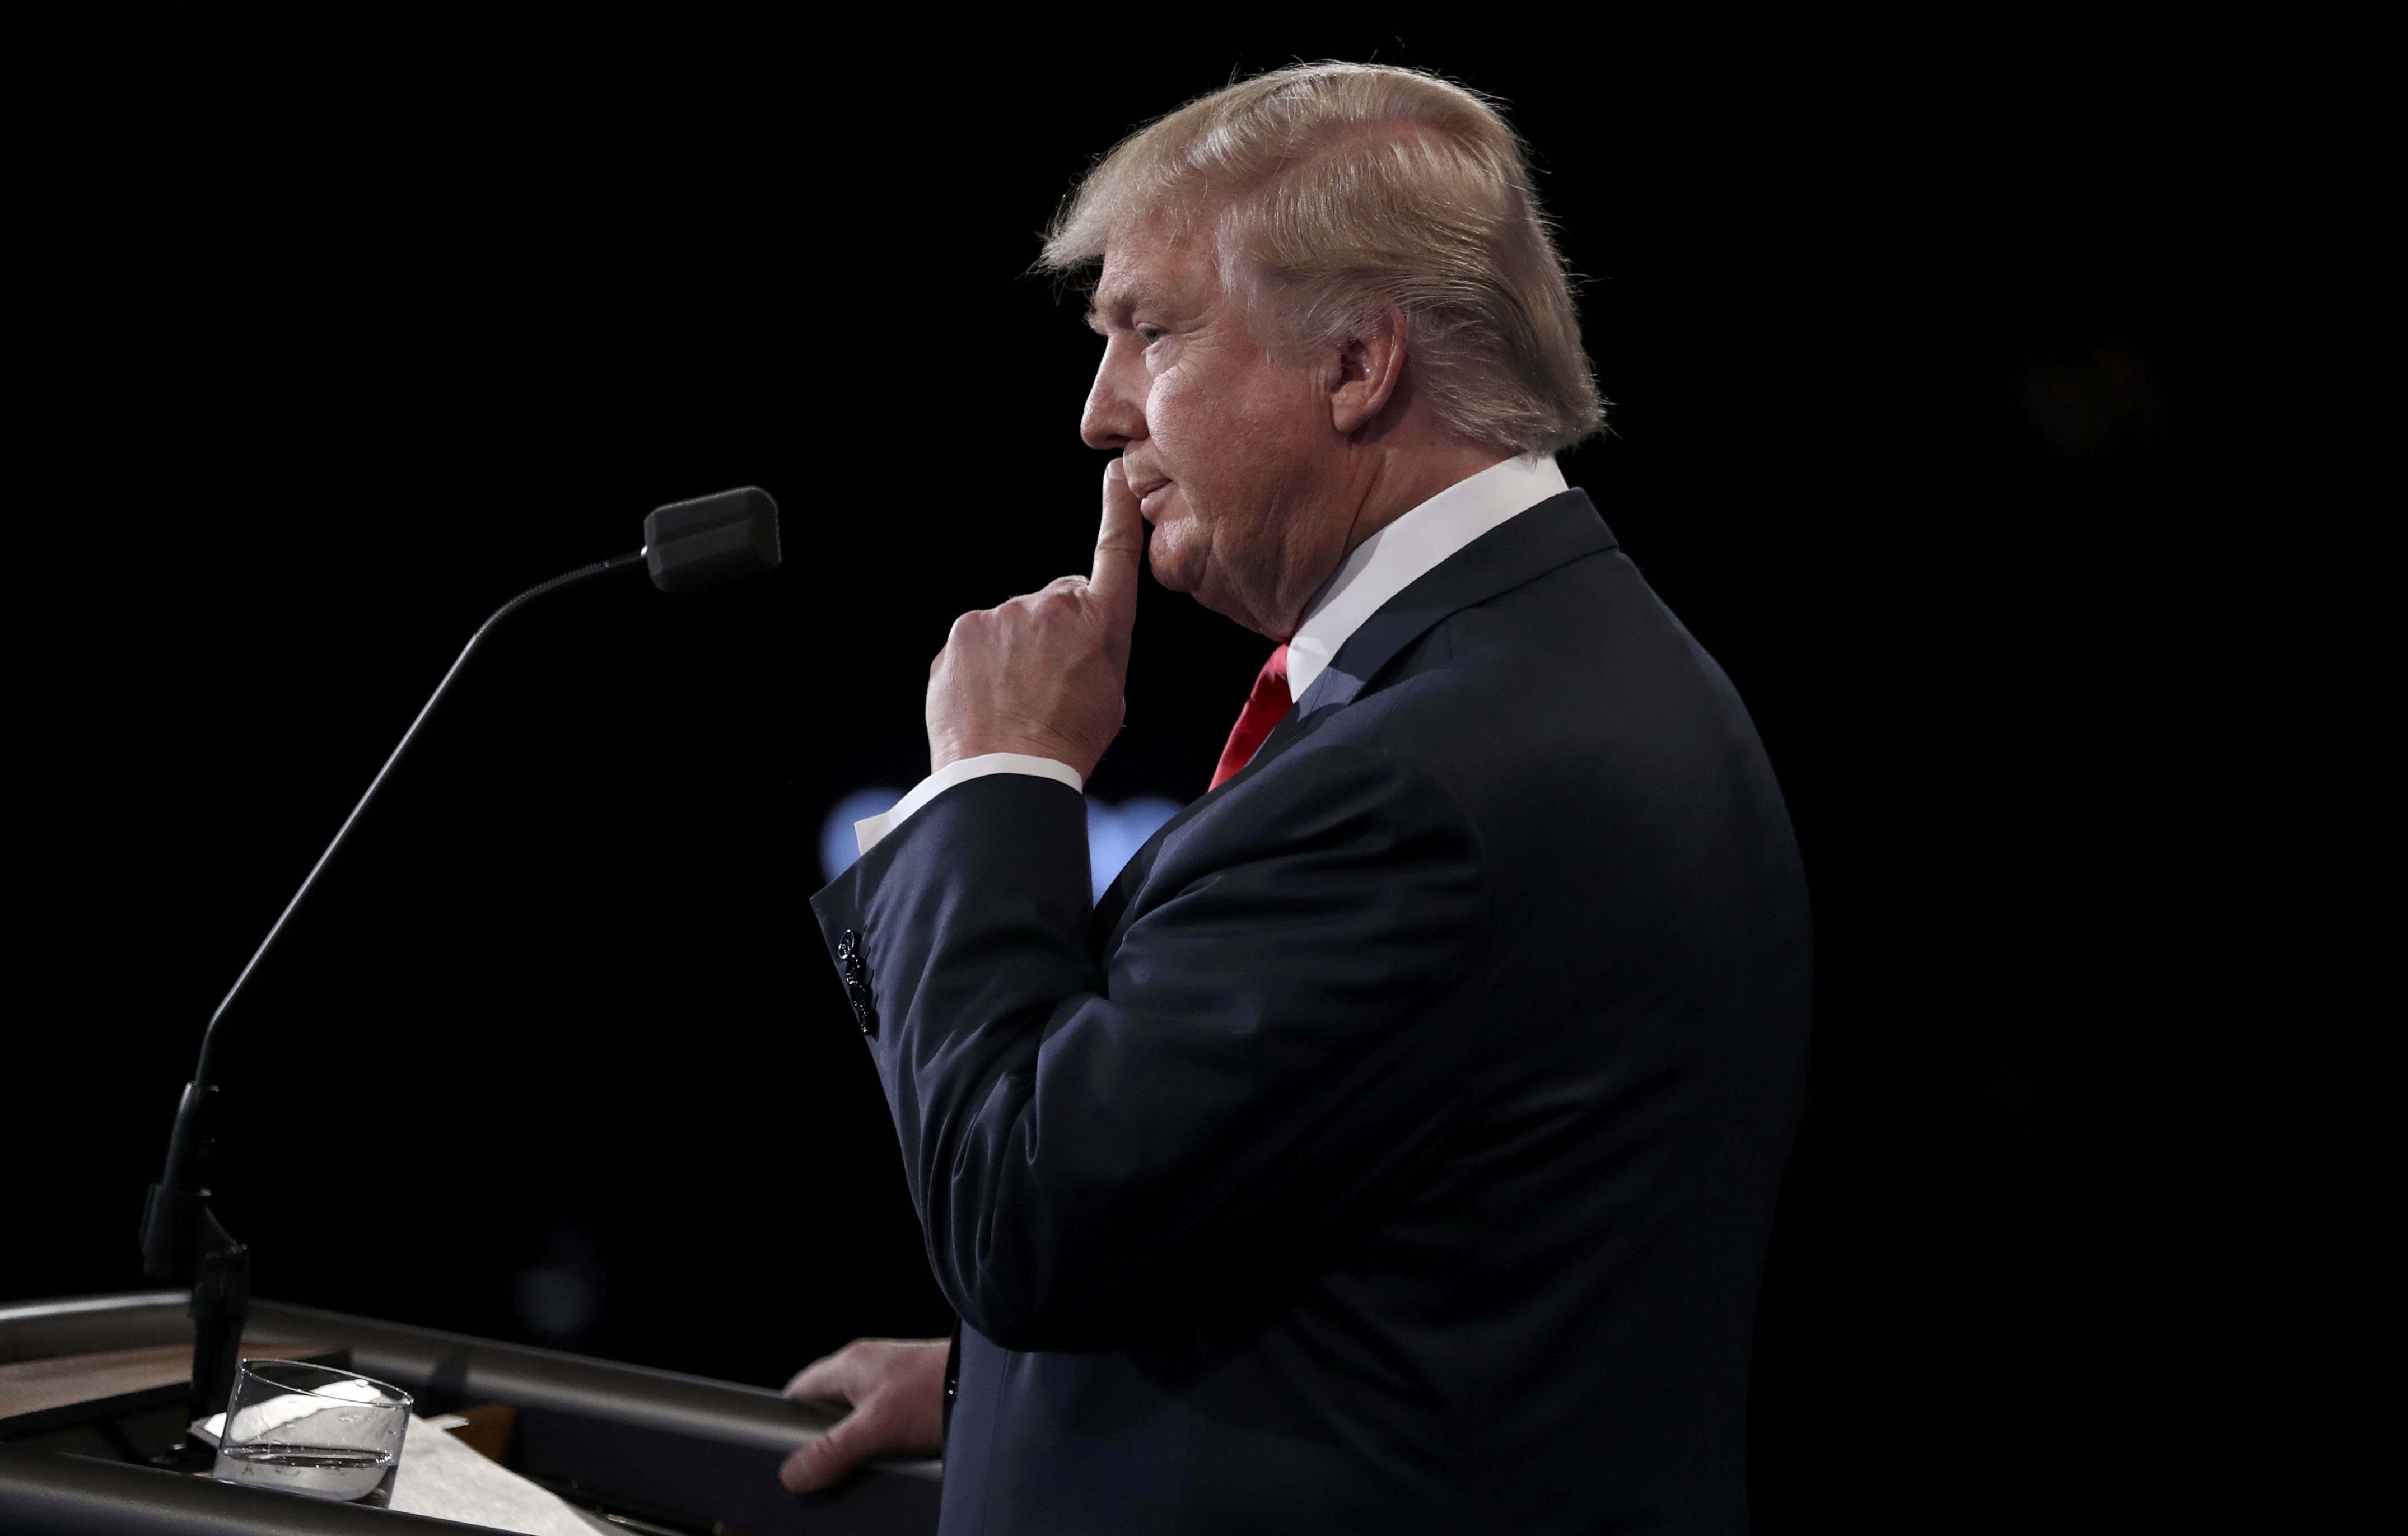 Donald Trump listens to rival Hillary Clinton during their presidential debate in Las Vegas on Wednesday. | REUTERS